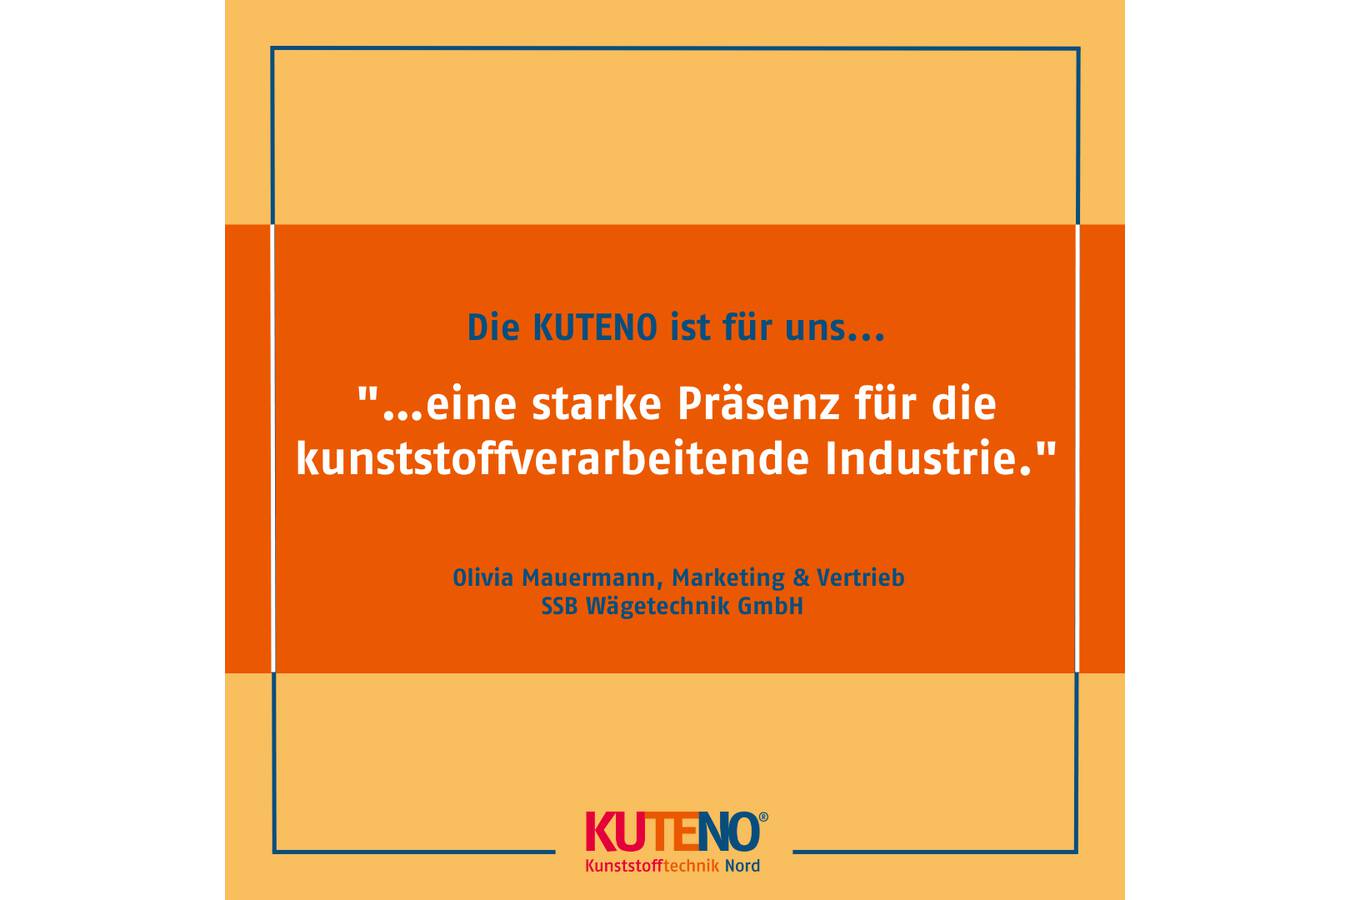 SSB Wägetechnik at Kuteno 2023 That was our first Kuteno: The trade fair for the plastics processing industry